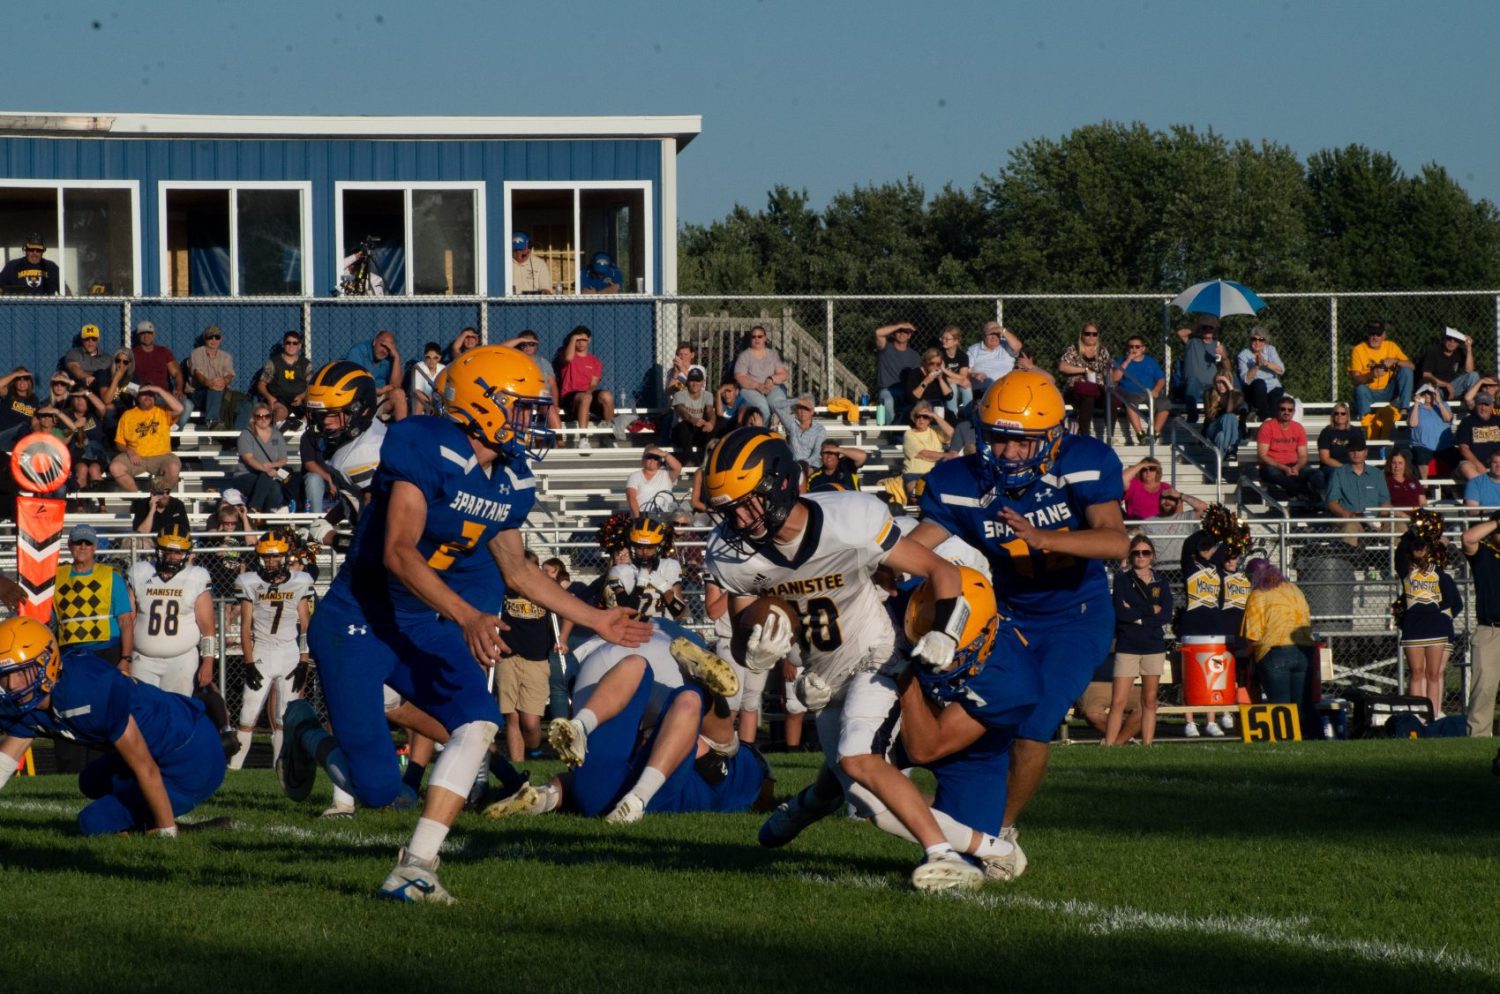 Manistee cruises past Mason County Central, 27-6